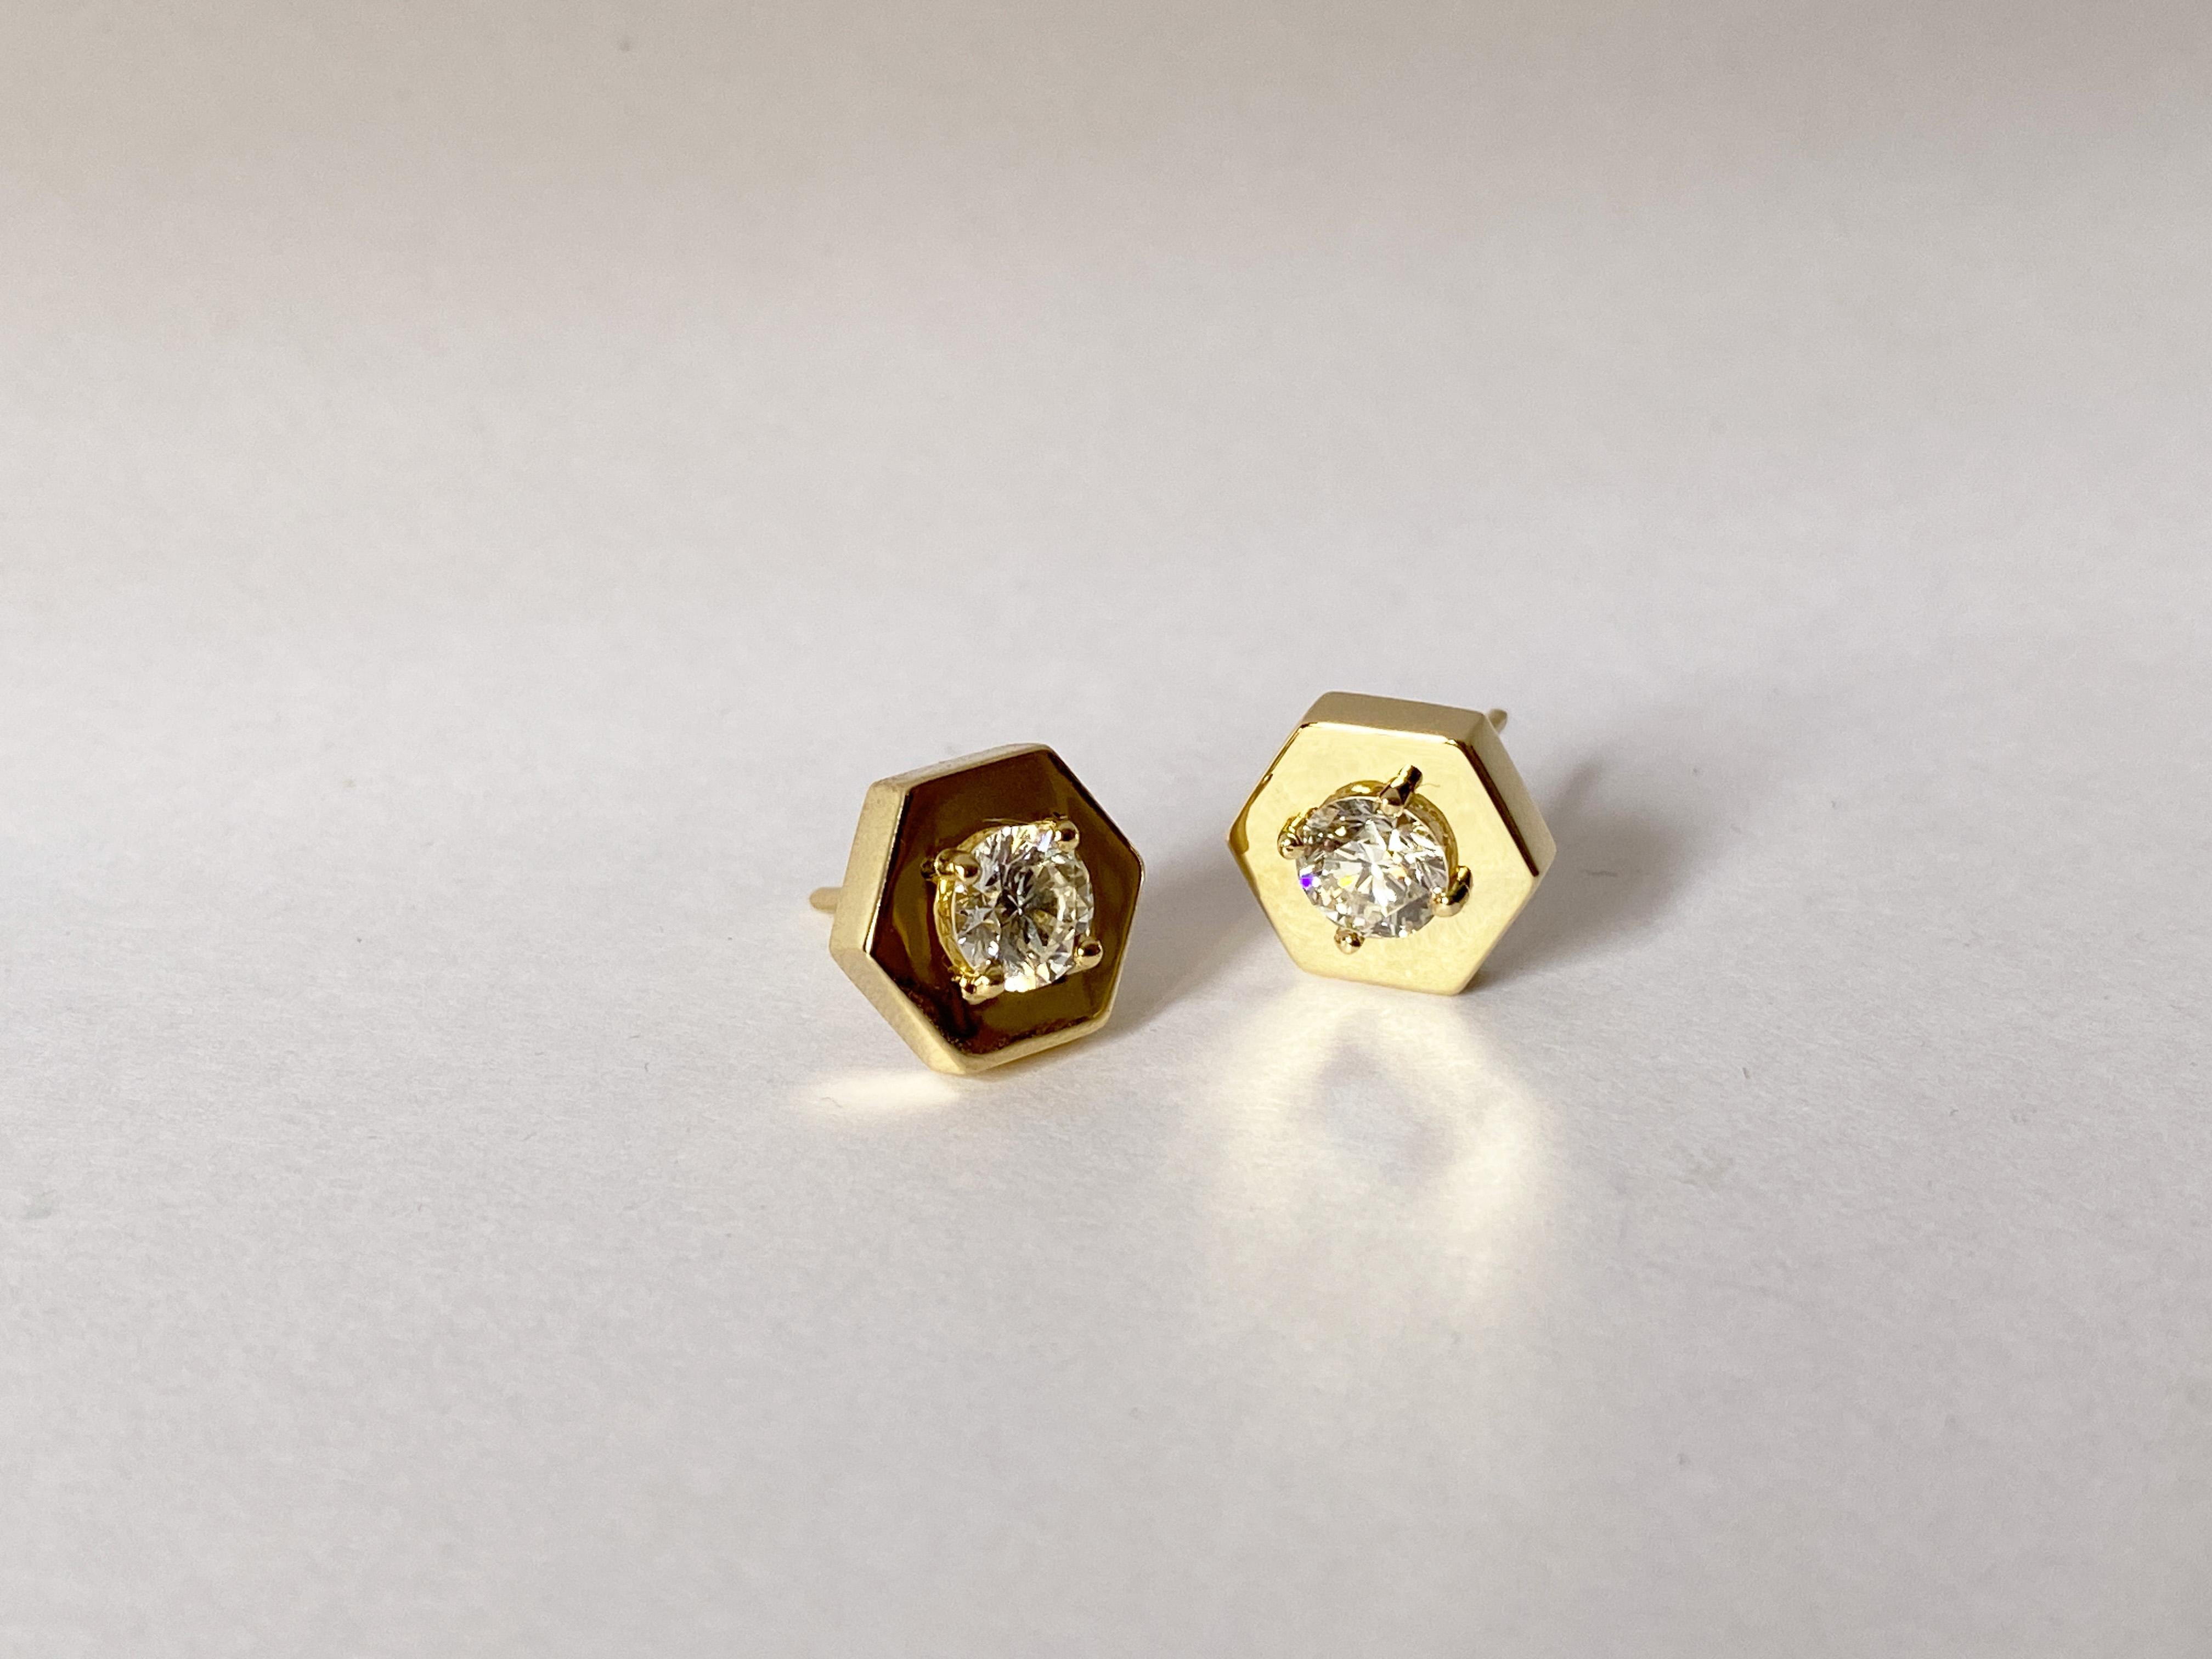 Rossella Ugolini 18K Gold 0.60 Carats White Diamonds Stud Hexagonal Earrings In New Condition For Sale In Rome, IT